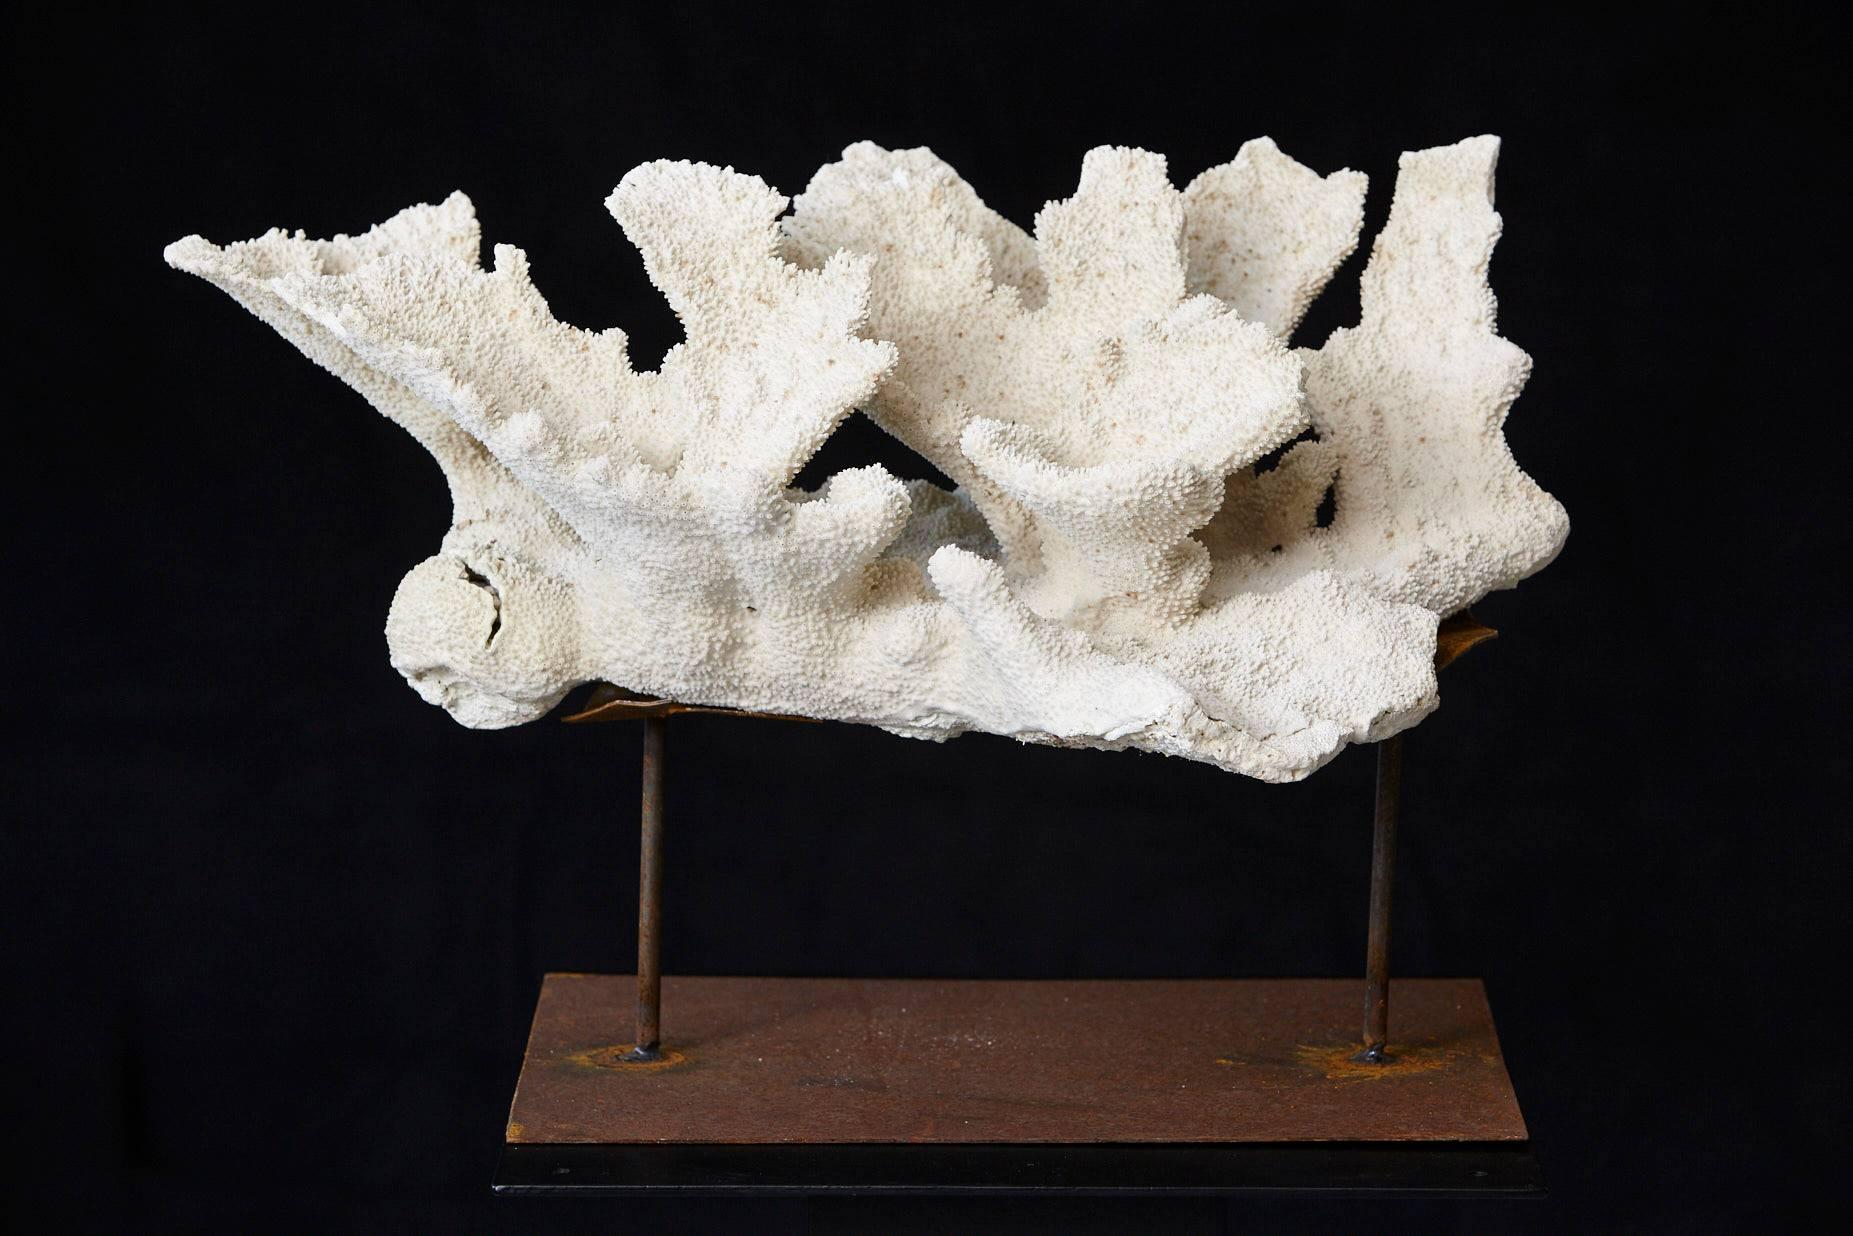 Very large vintage white coral specimen from the Pacific Ocean raised on a custom welded, distressed looking iron stand. Beautiful decoration piece. In good, clean condition.